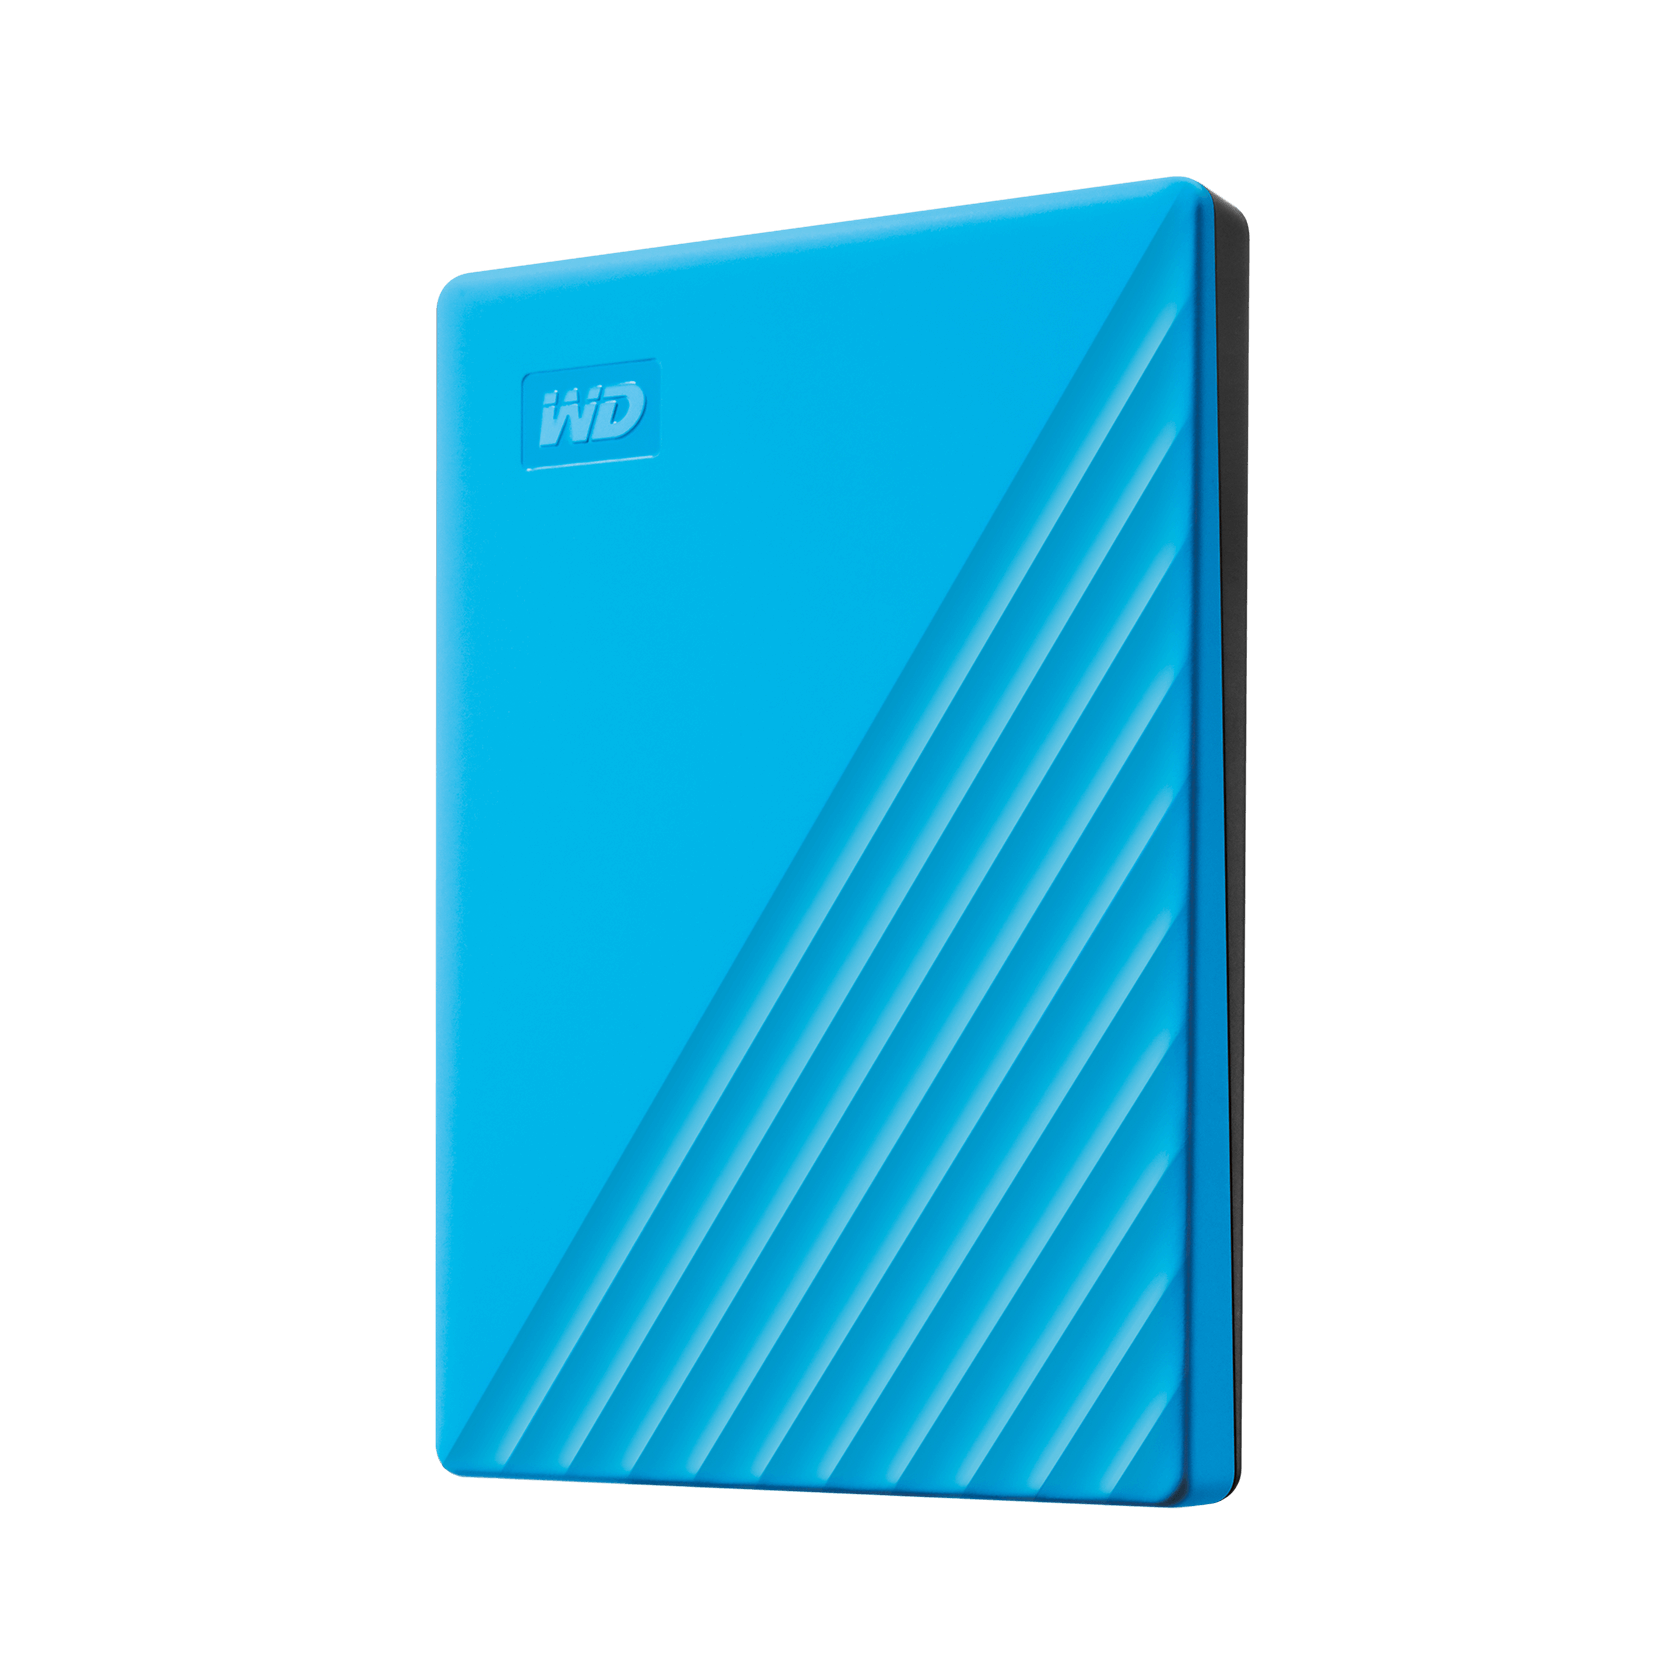 WD 2TB My Passport, Portable External Hard Drive, Blue - WDBYVG0020BBL-WESN - image 2 of 8